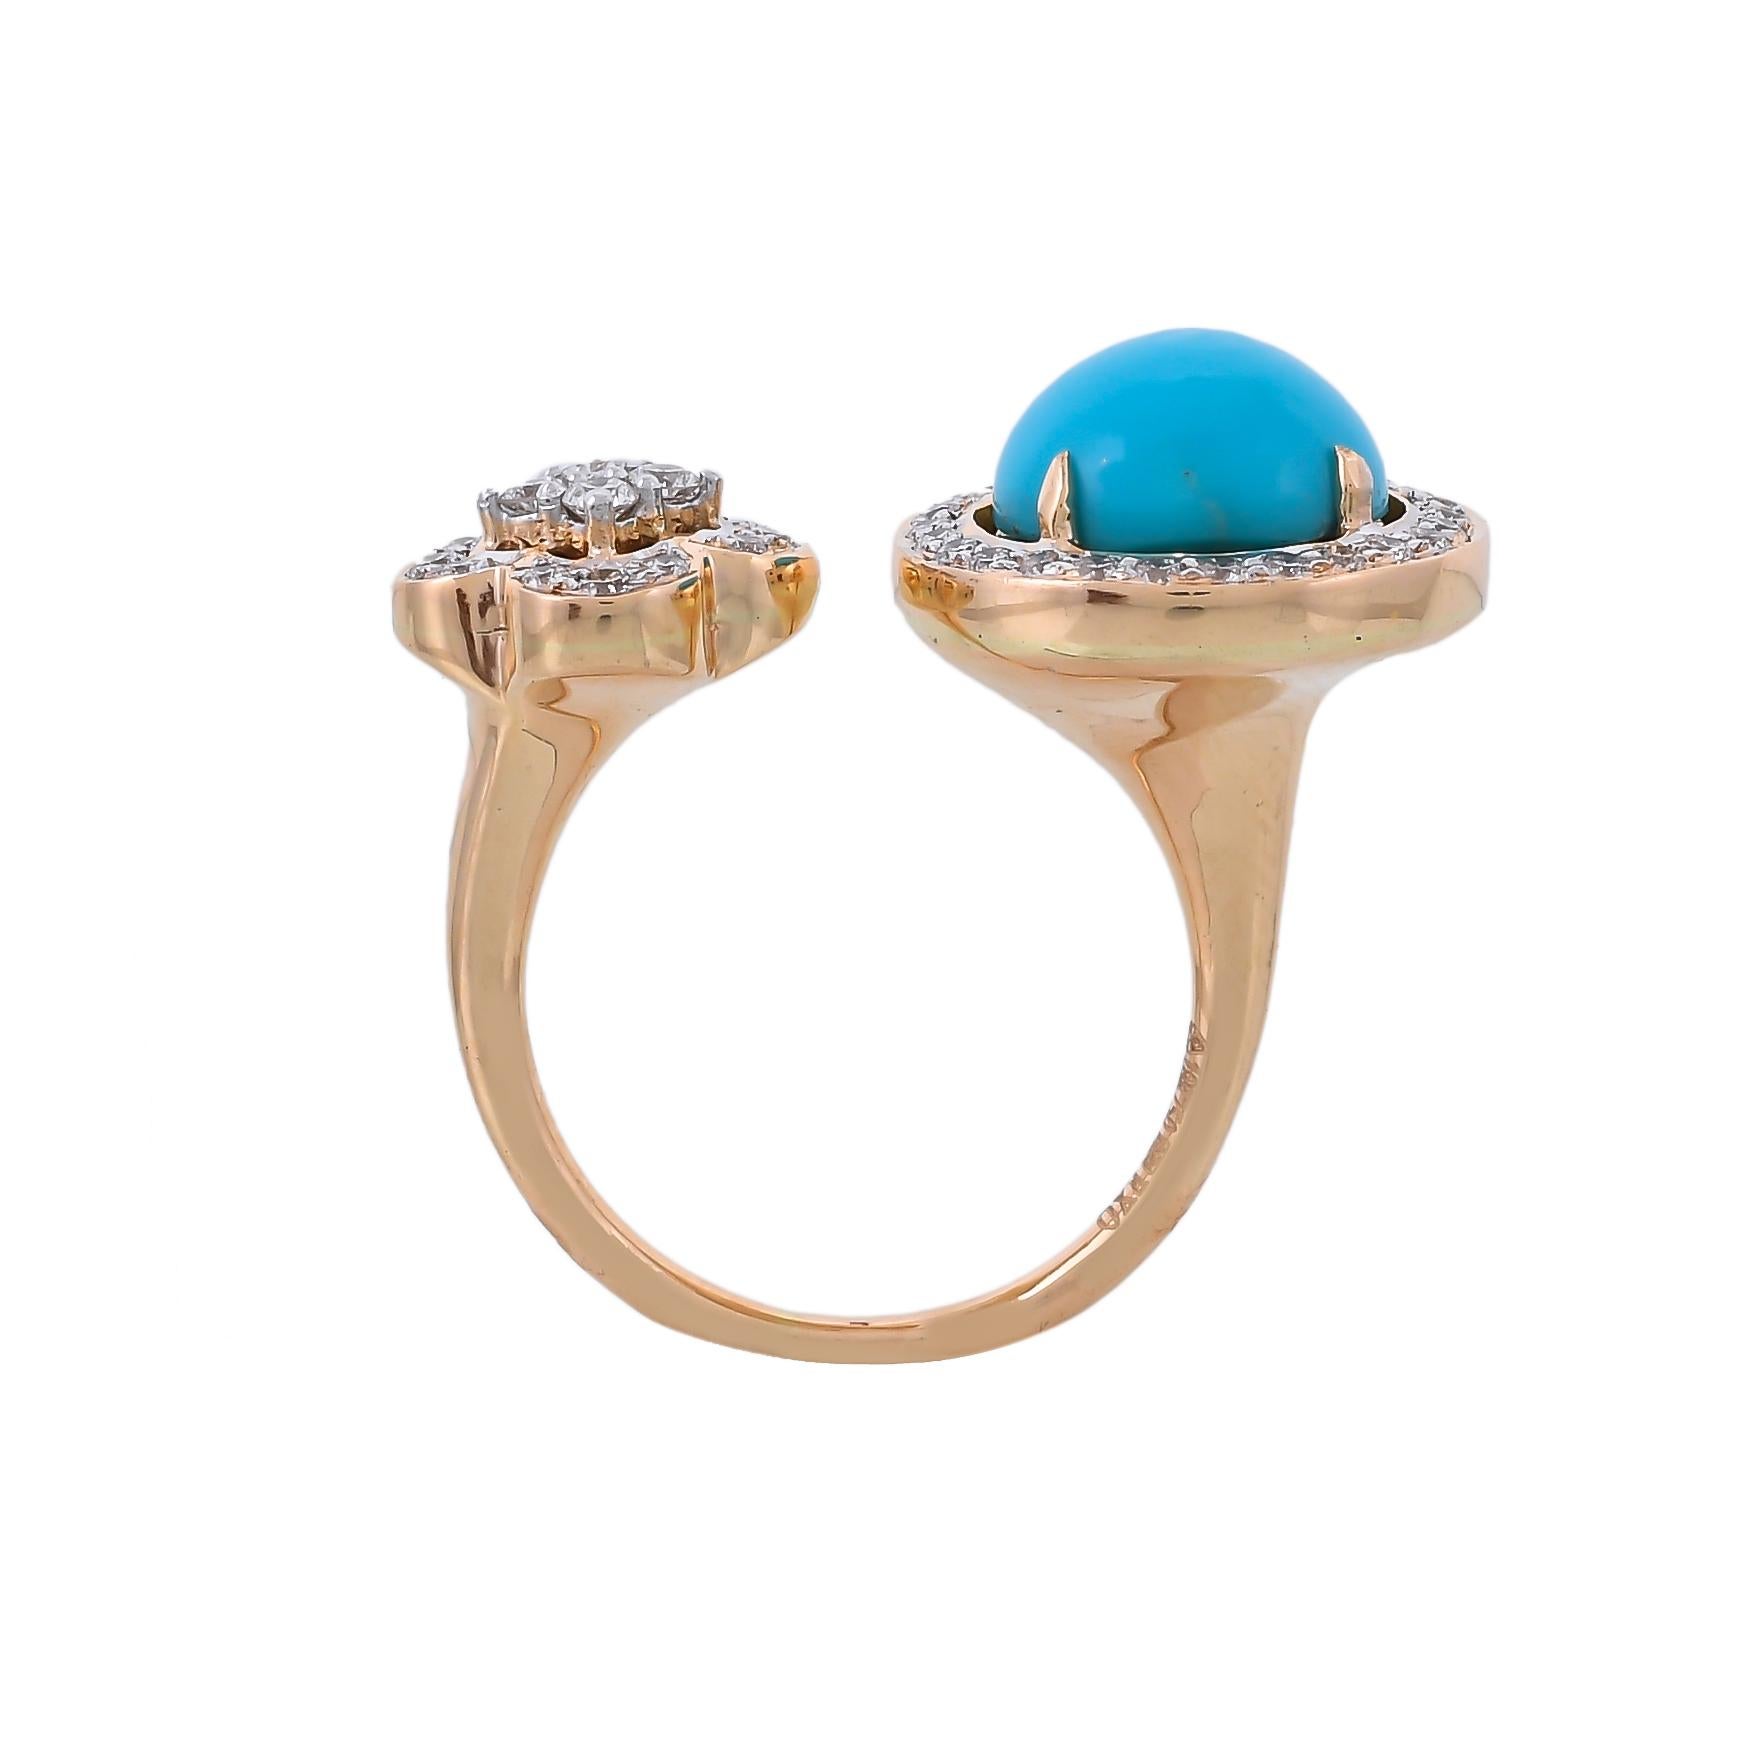 Crafted in 18 Karat yellow gold, this contemporary open band ring features a 3.45 carat fine turquoise cabochon embellished with 0.50 carat pave set diamonds.
Add extra sparkle with this precious and one of a kind piece.
Art of gifting: the Jewel is